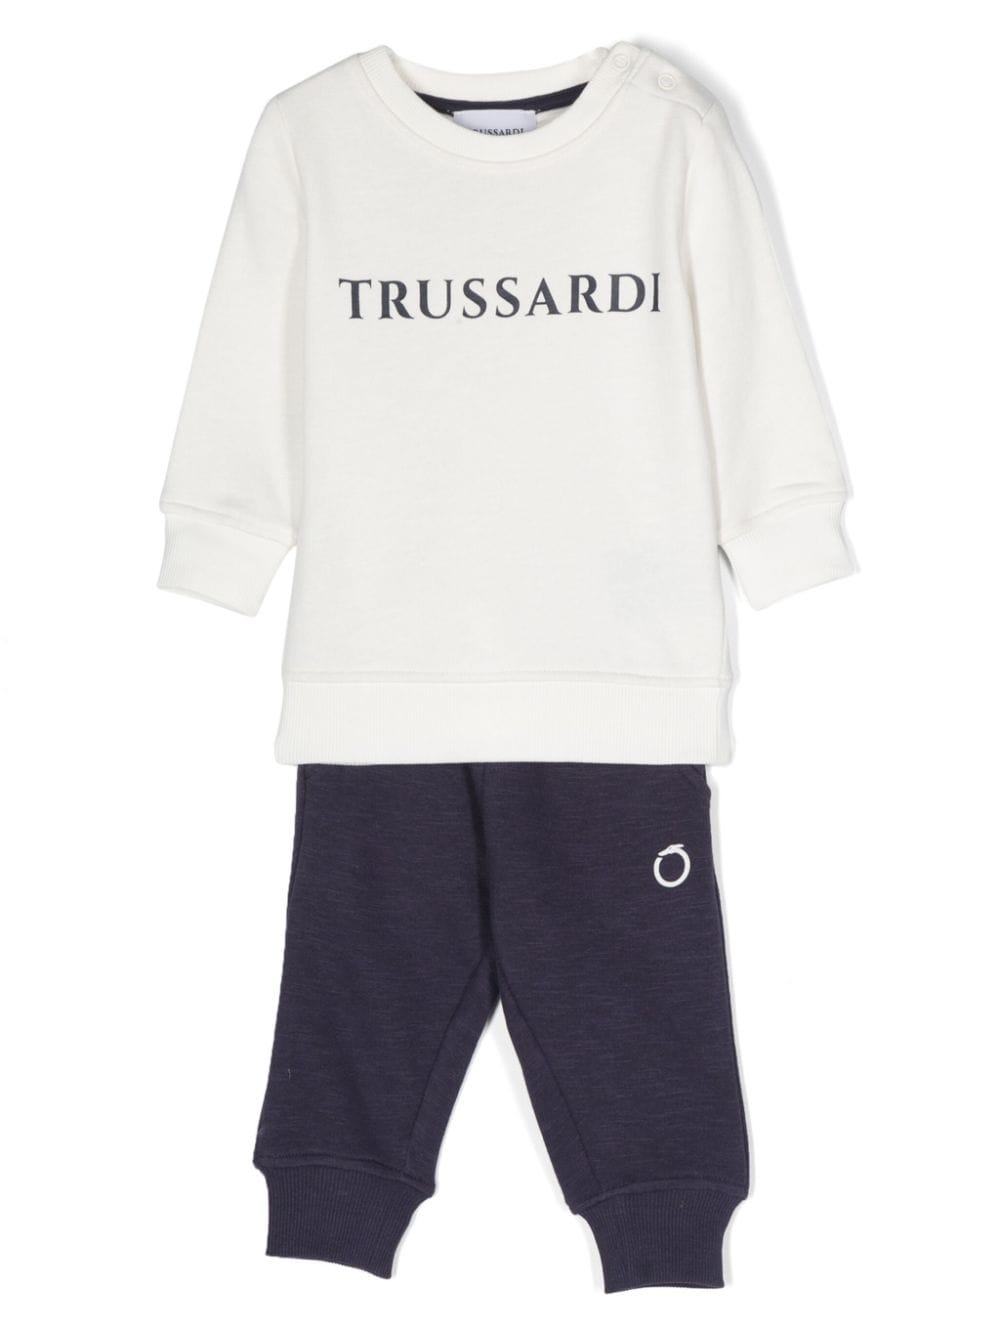 White and blue sports outfit for newborns with logo